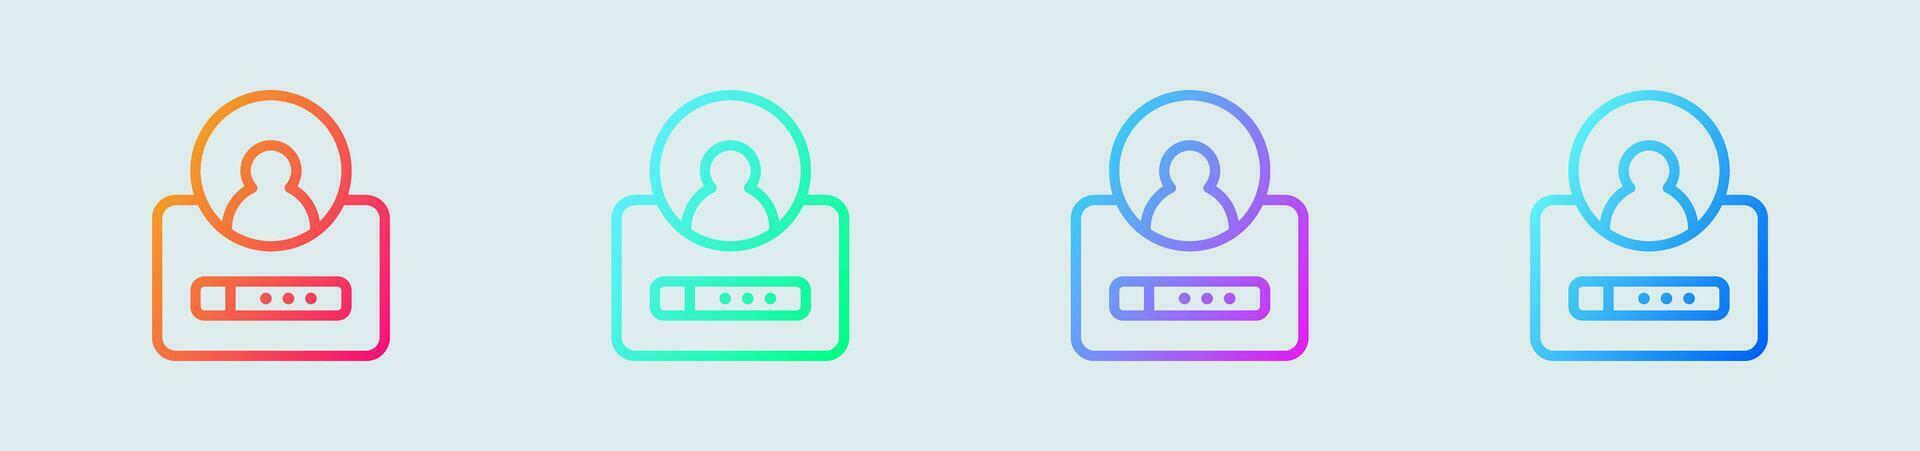 Login line icon in gradient colors. Sign in symbol vector illustration.